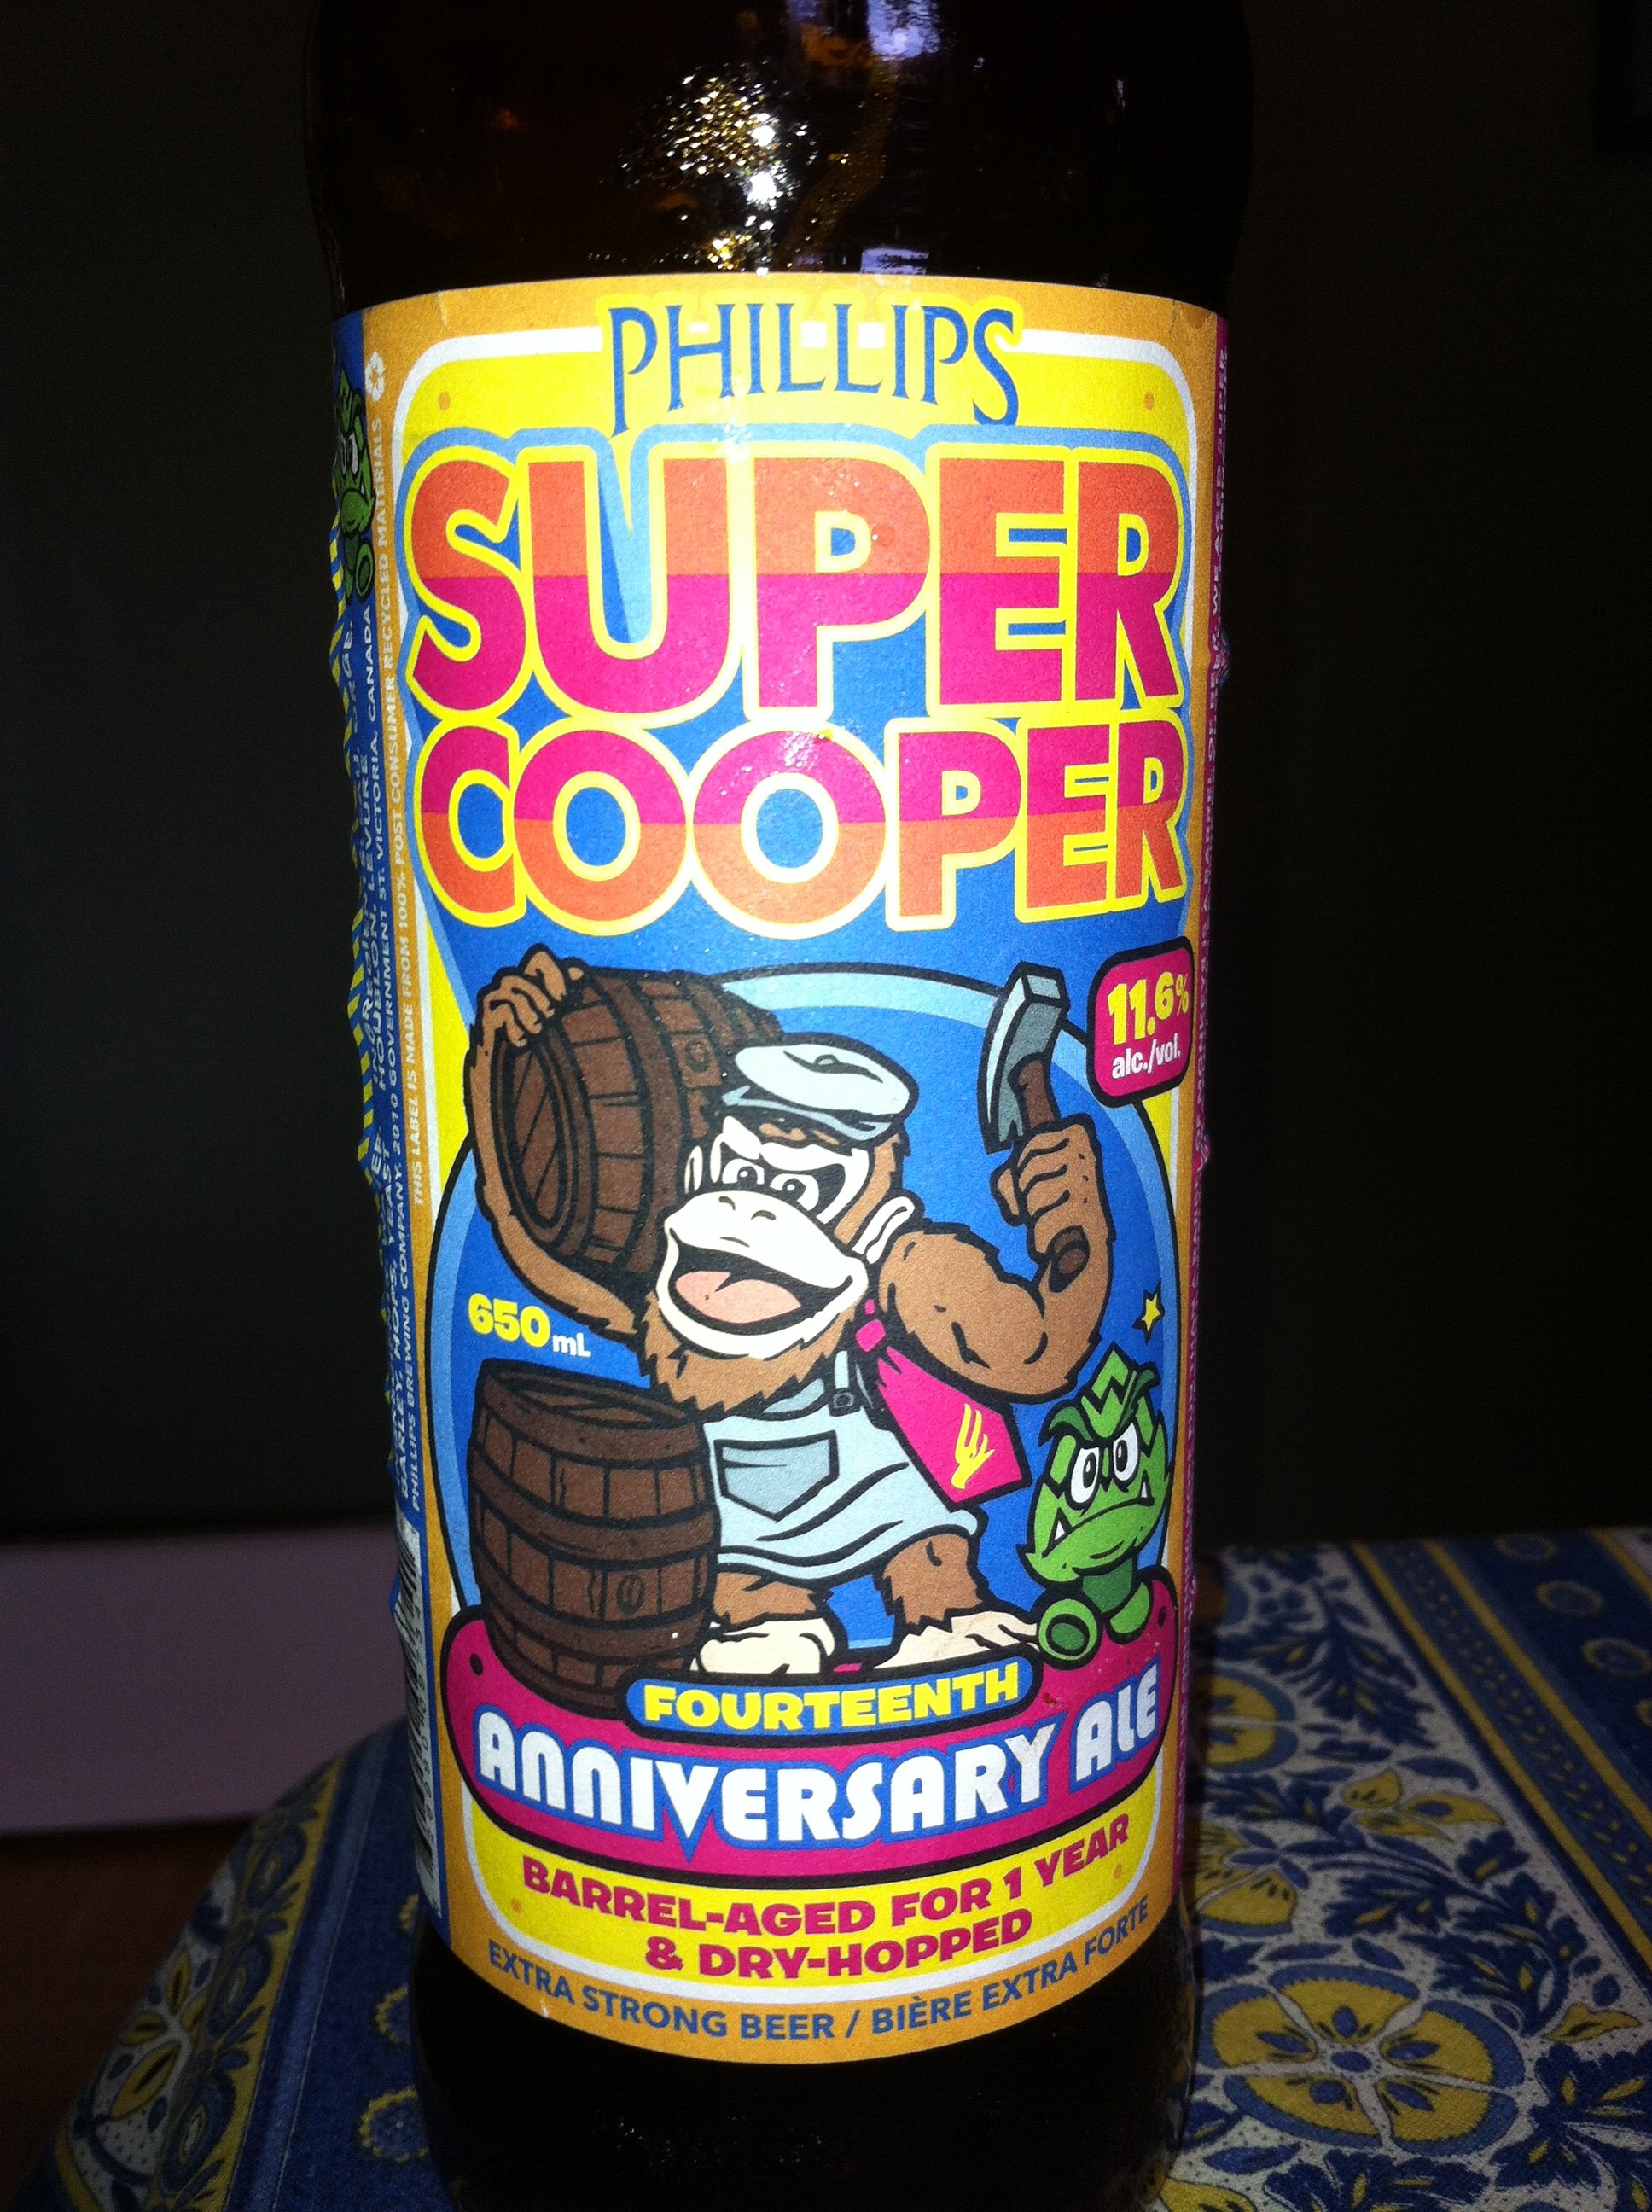 Phillips Super Cooper 14th Anniversary Ale Bottle (photo by Canal MacWhaler)